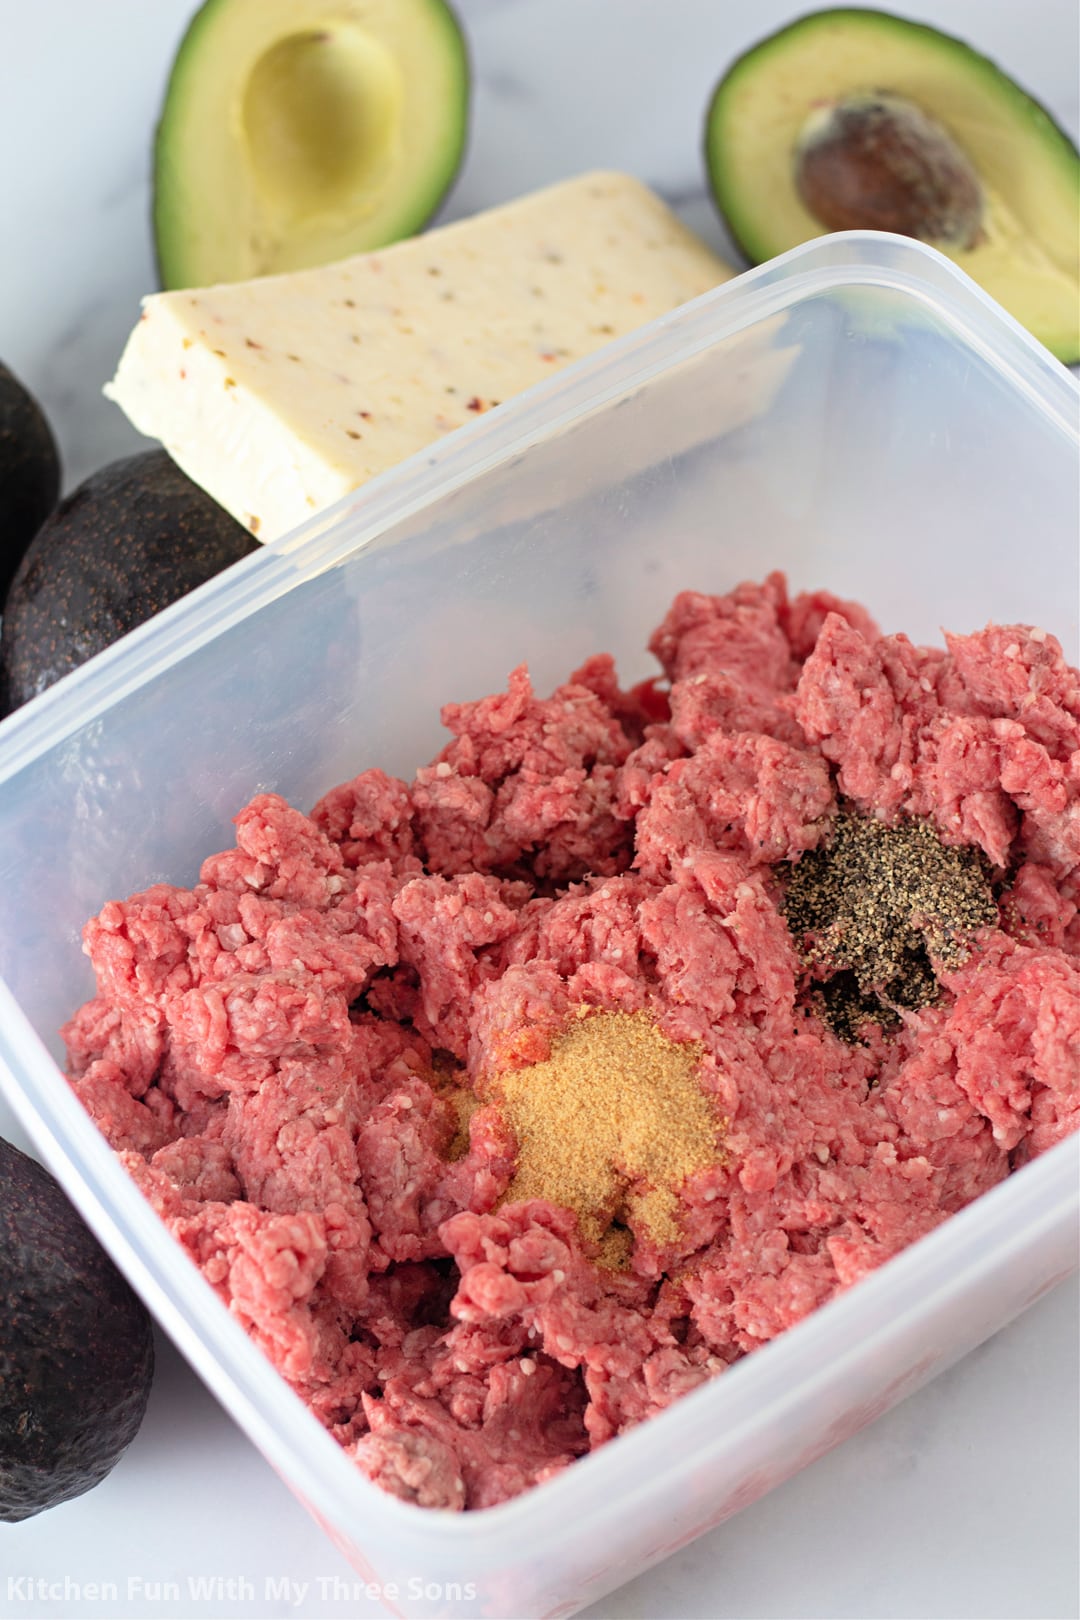 mixing seasoning into the ground beef.